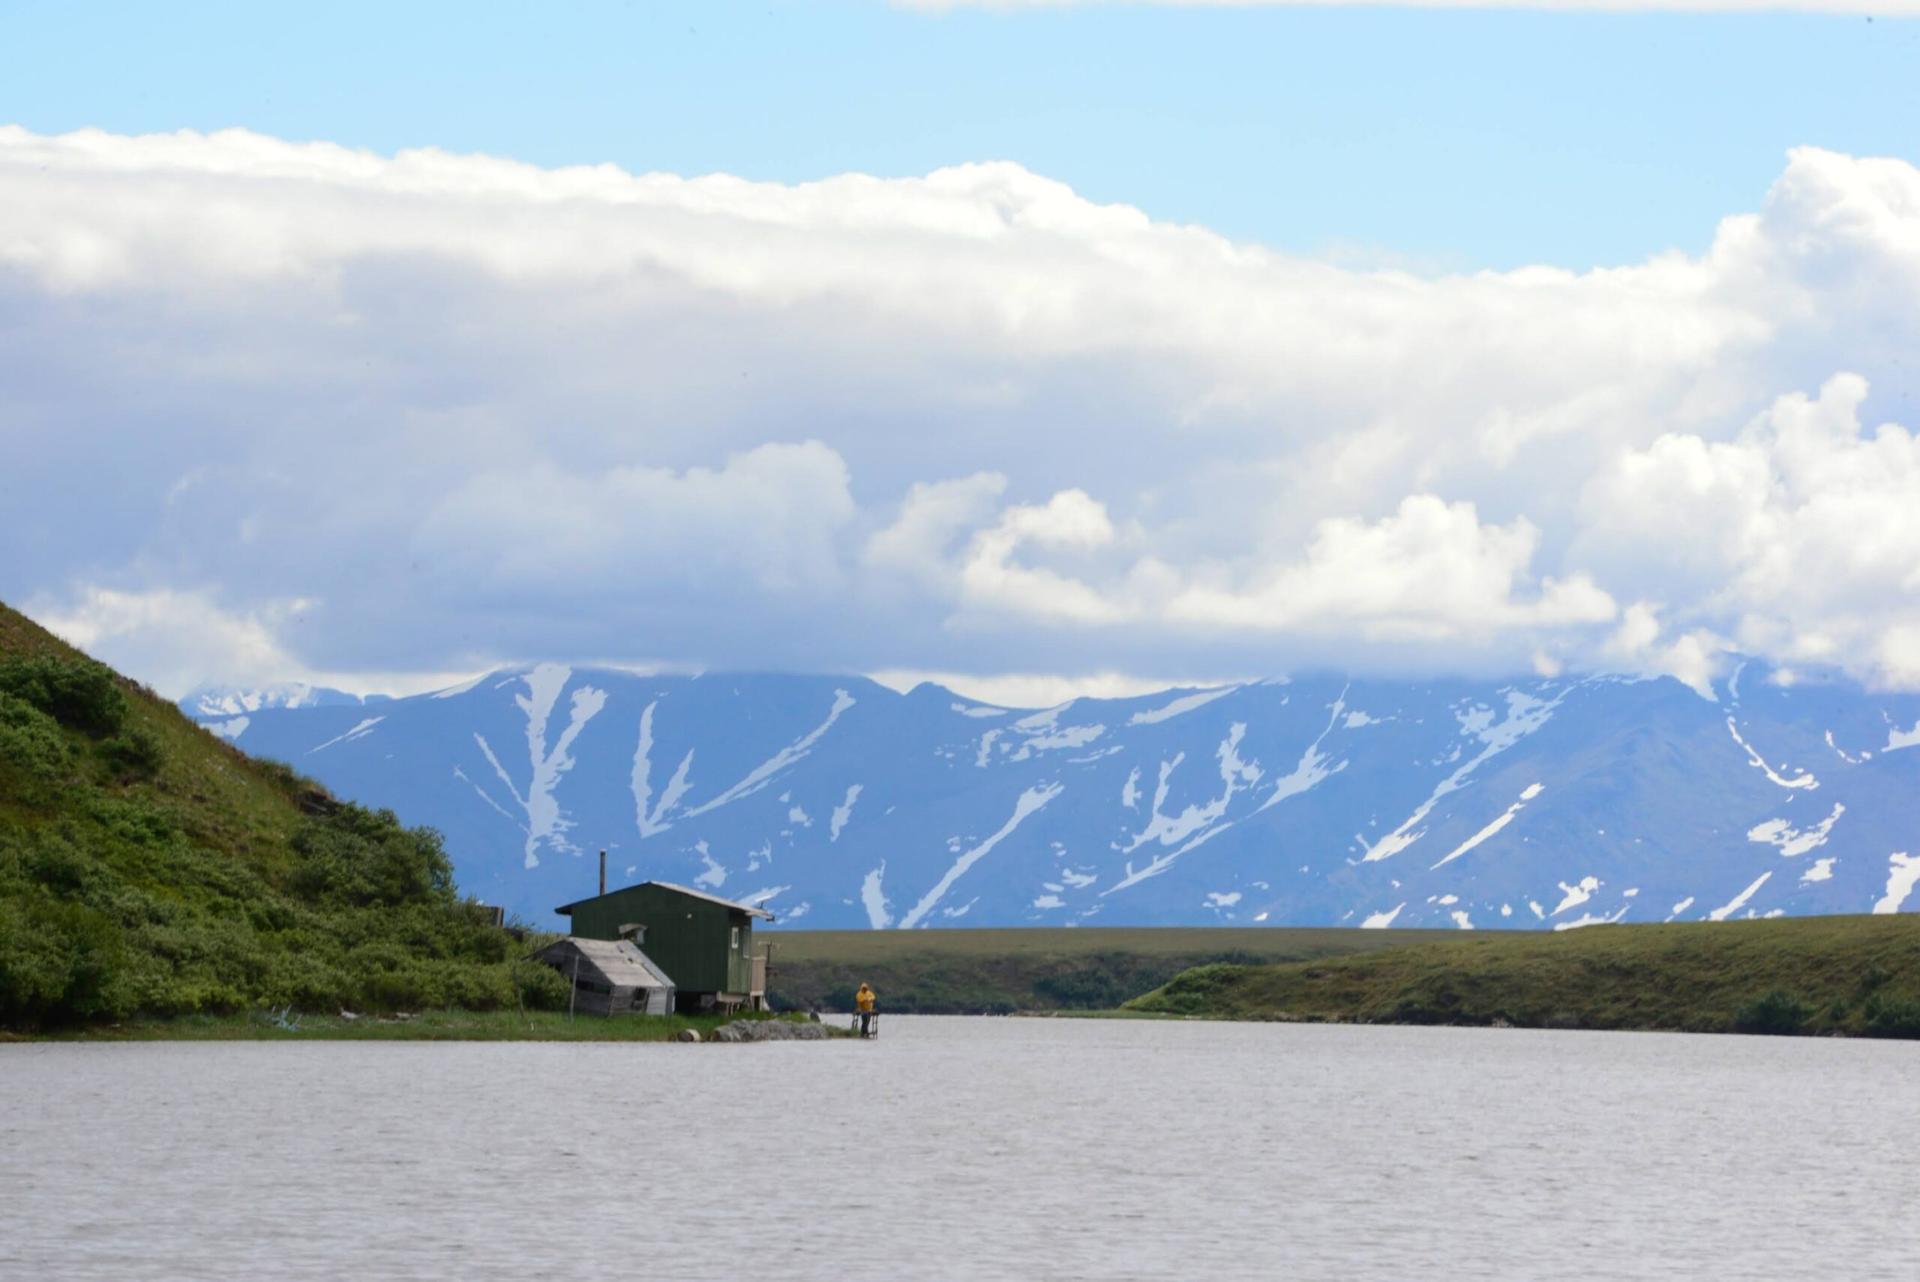 The Tuksuk Channel, which reaches inland to the Imuruk Basin and its surrounding tundra, is a vital area for harvests by residents of the nearby Iñupiaq villages of Brevig Mission and Teller.